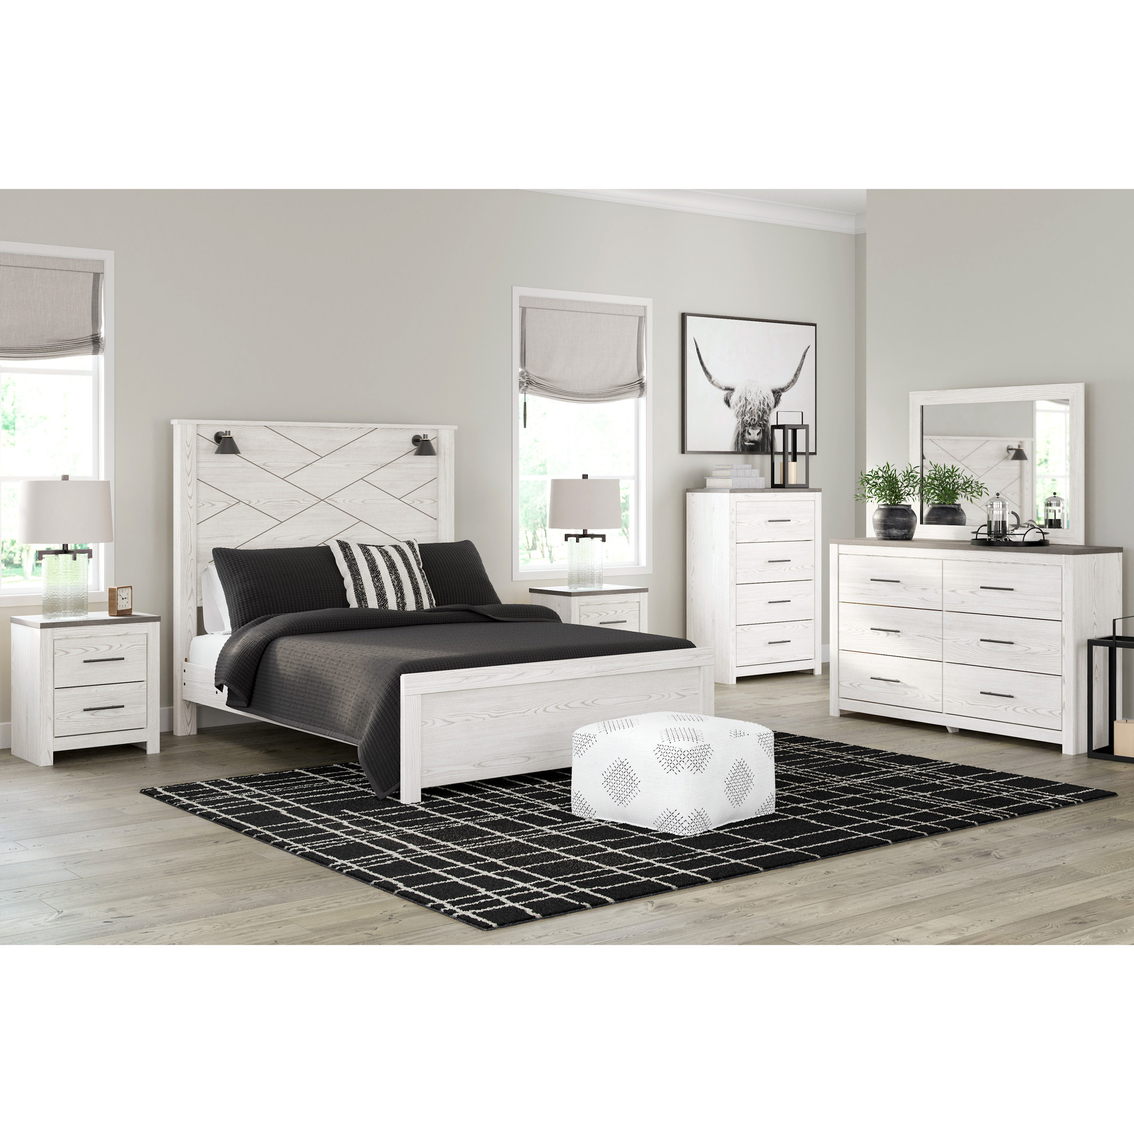 Signature Design By Ashley Gerridan Panel Bed With Lights 5 Pc. Bedroom ...